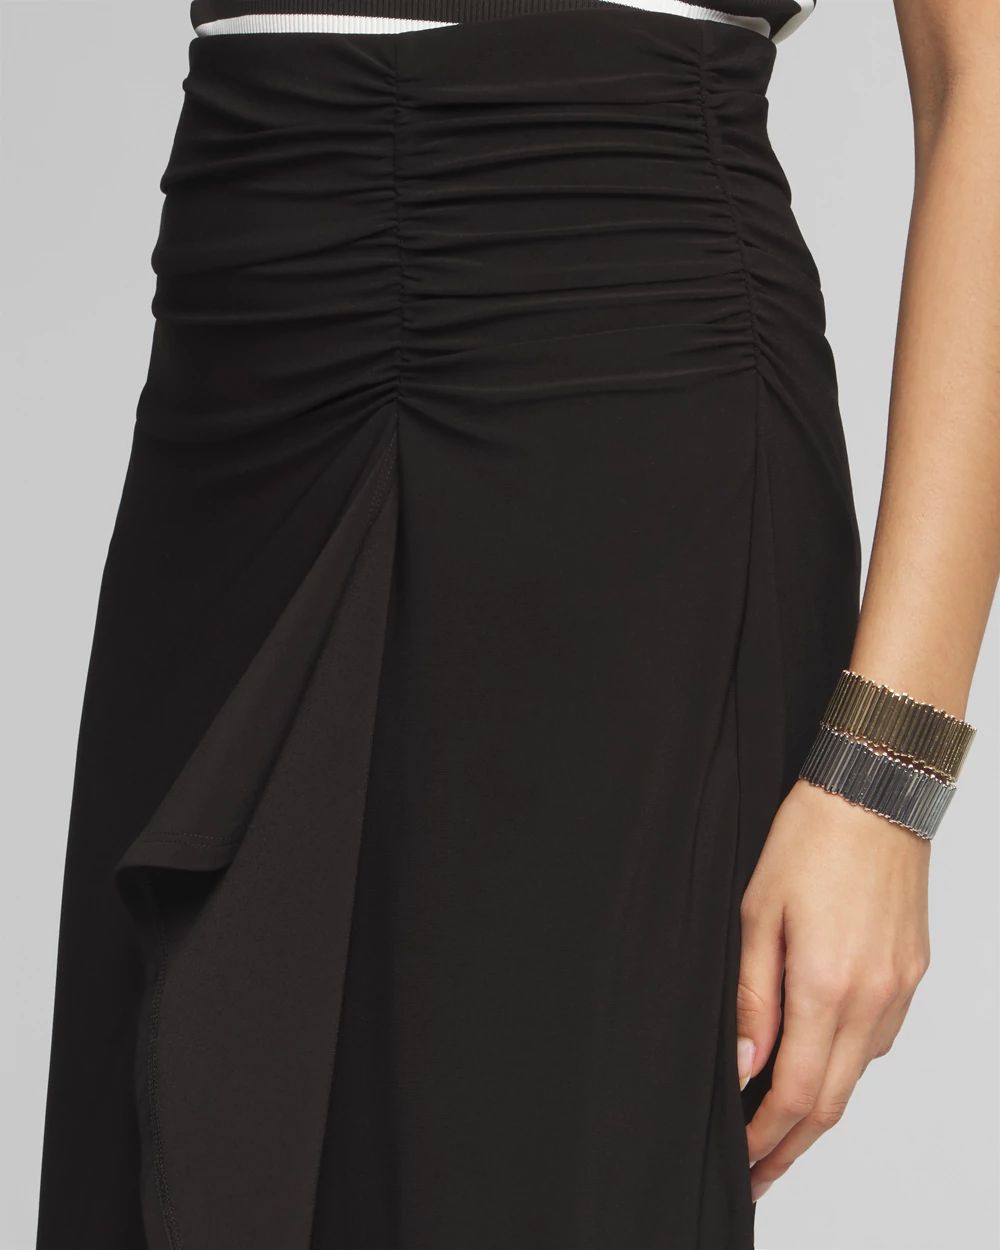 Ruched Matte Jersey Surplice Skirt click to view larger image.